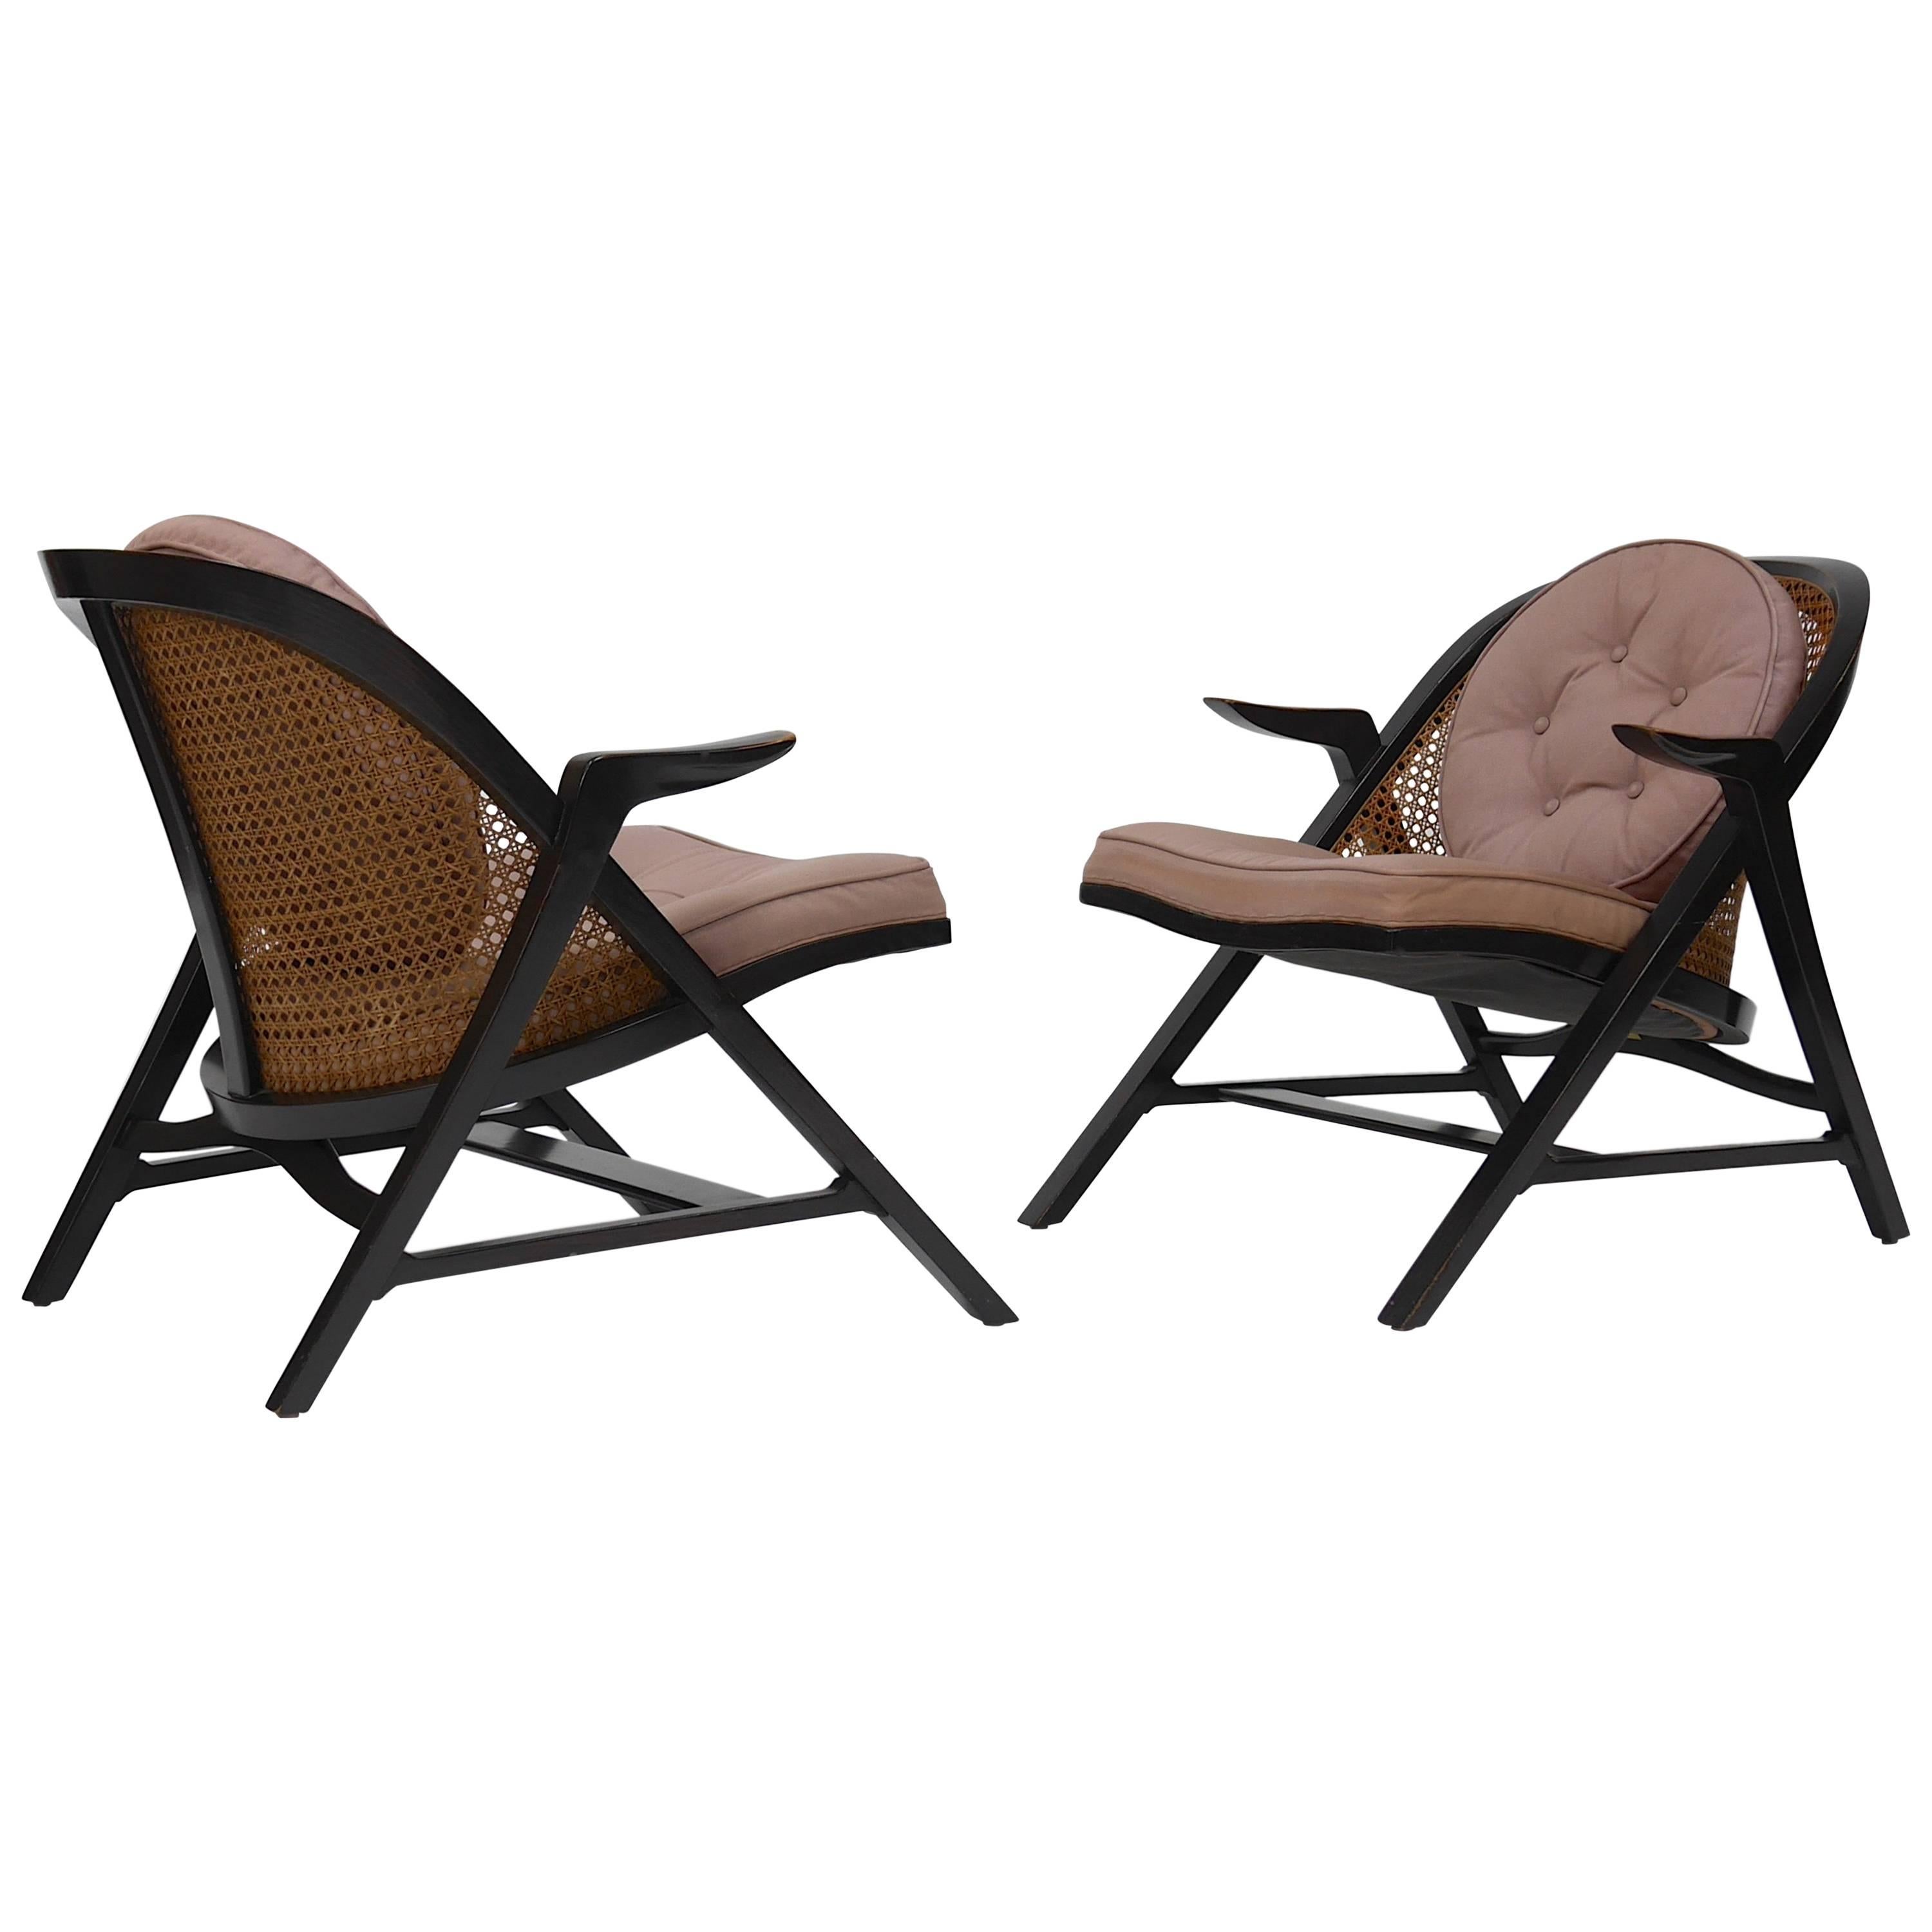 Pair of A-Frame Lounge Chairs by Edward Wormley for Dunbar